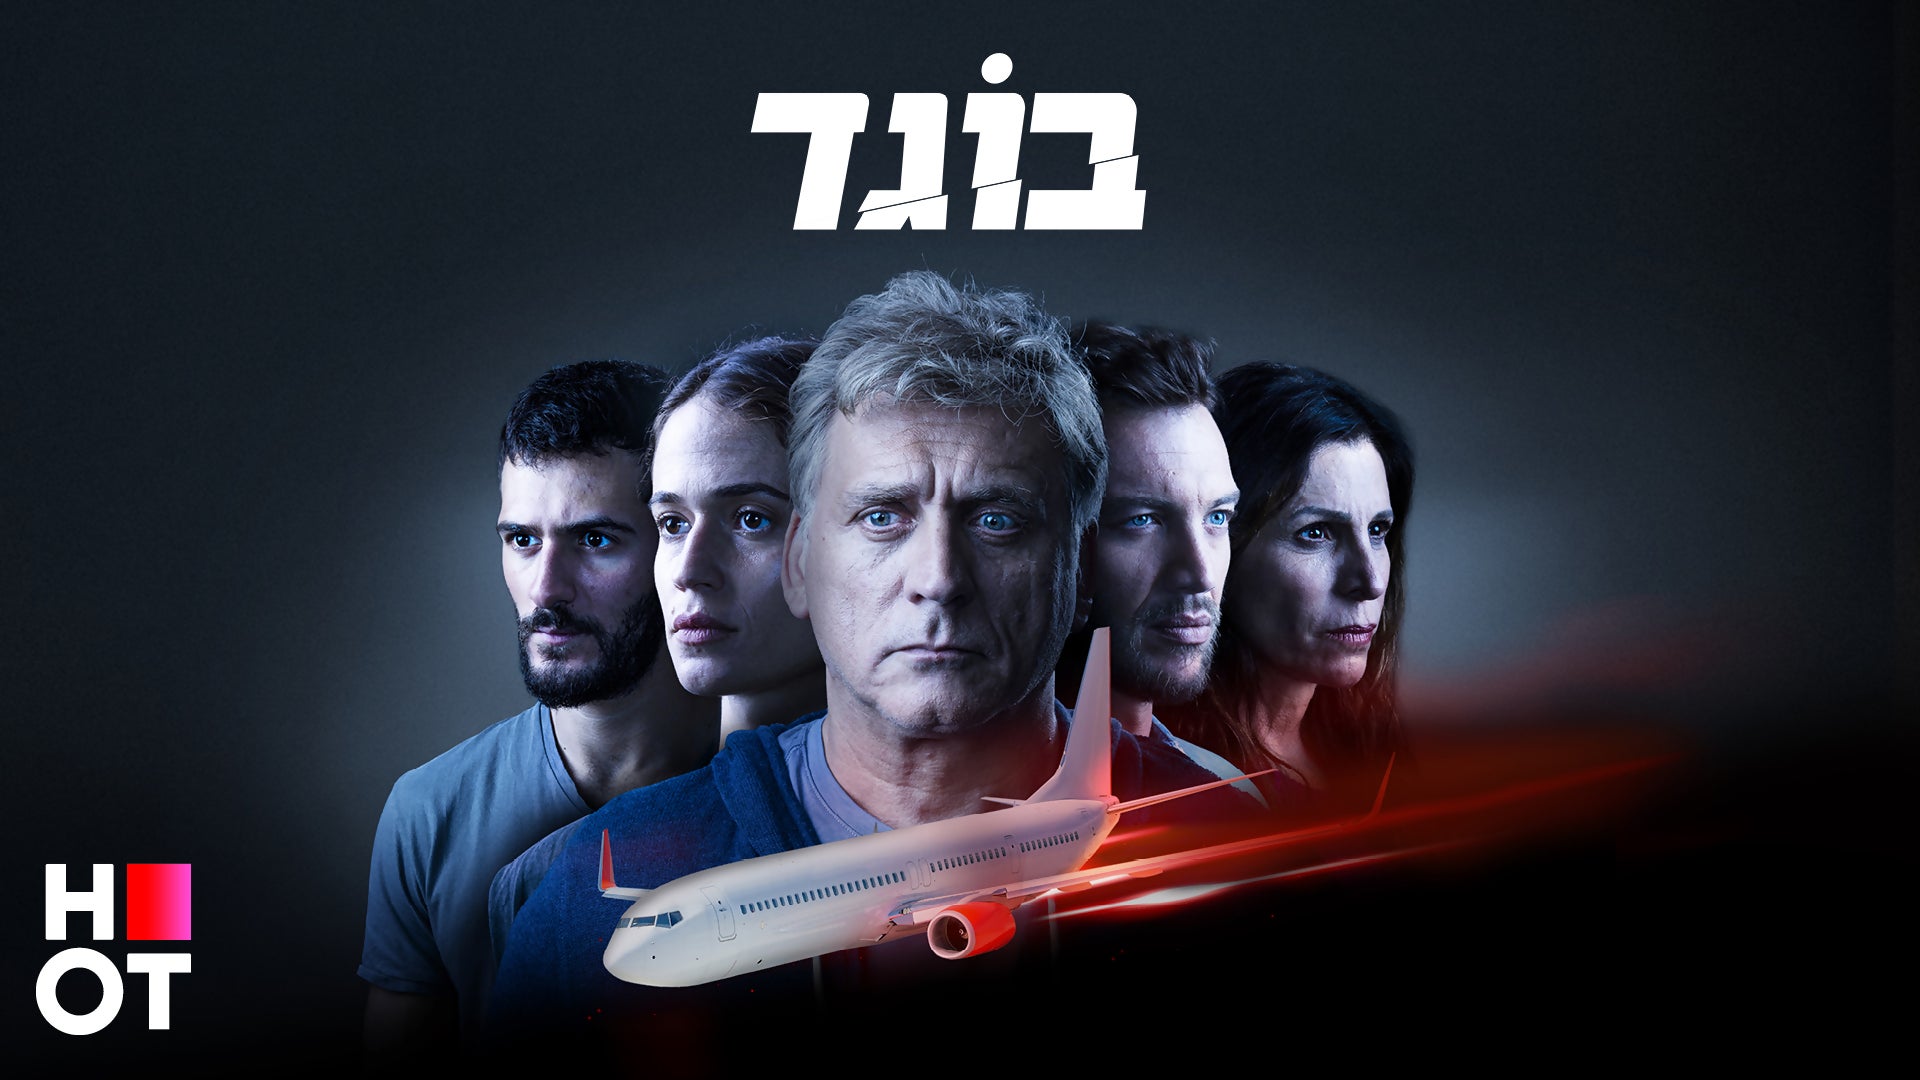 TV ratings for Traitor (בוגד) in Alemania. HOT TV series